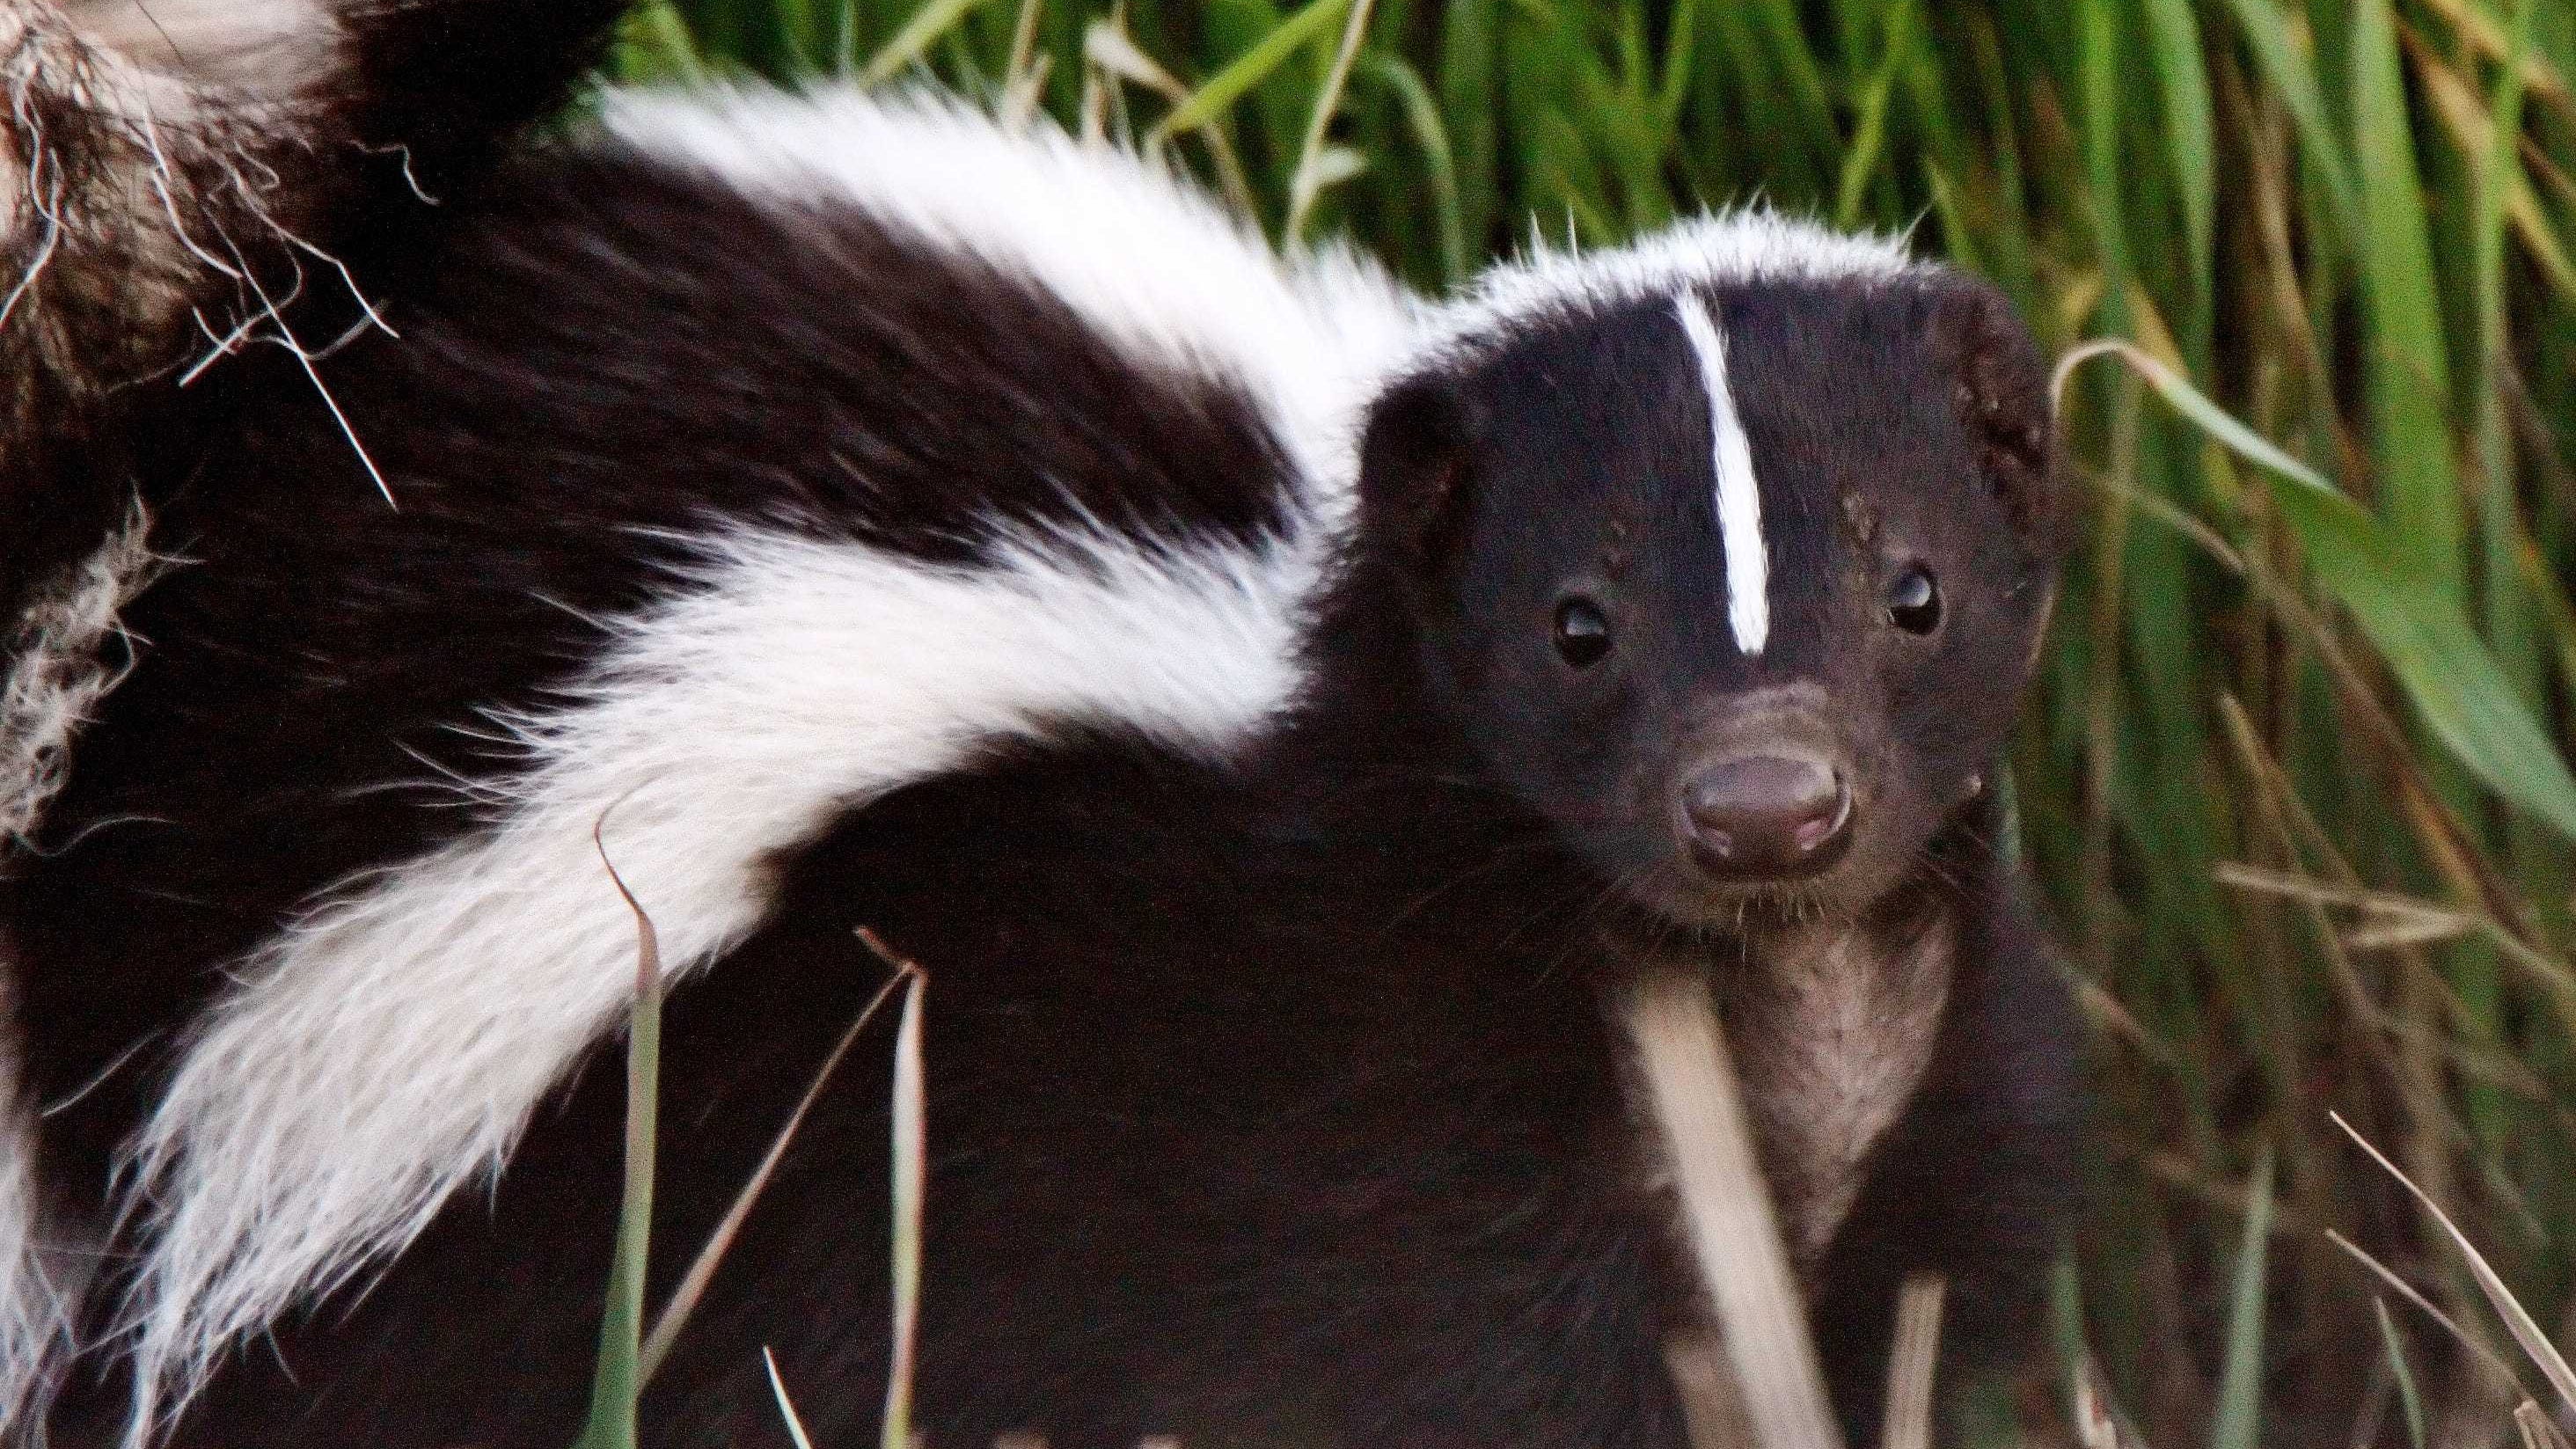 The Skunks are OK